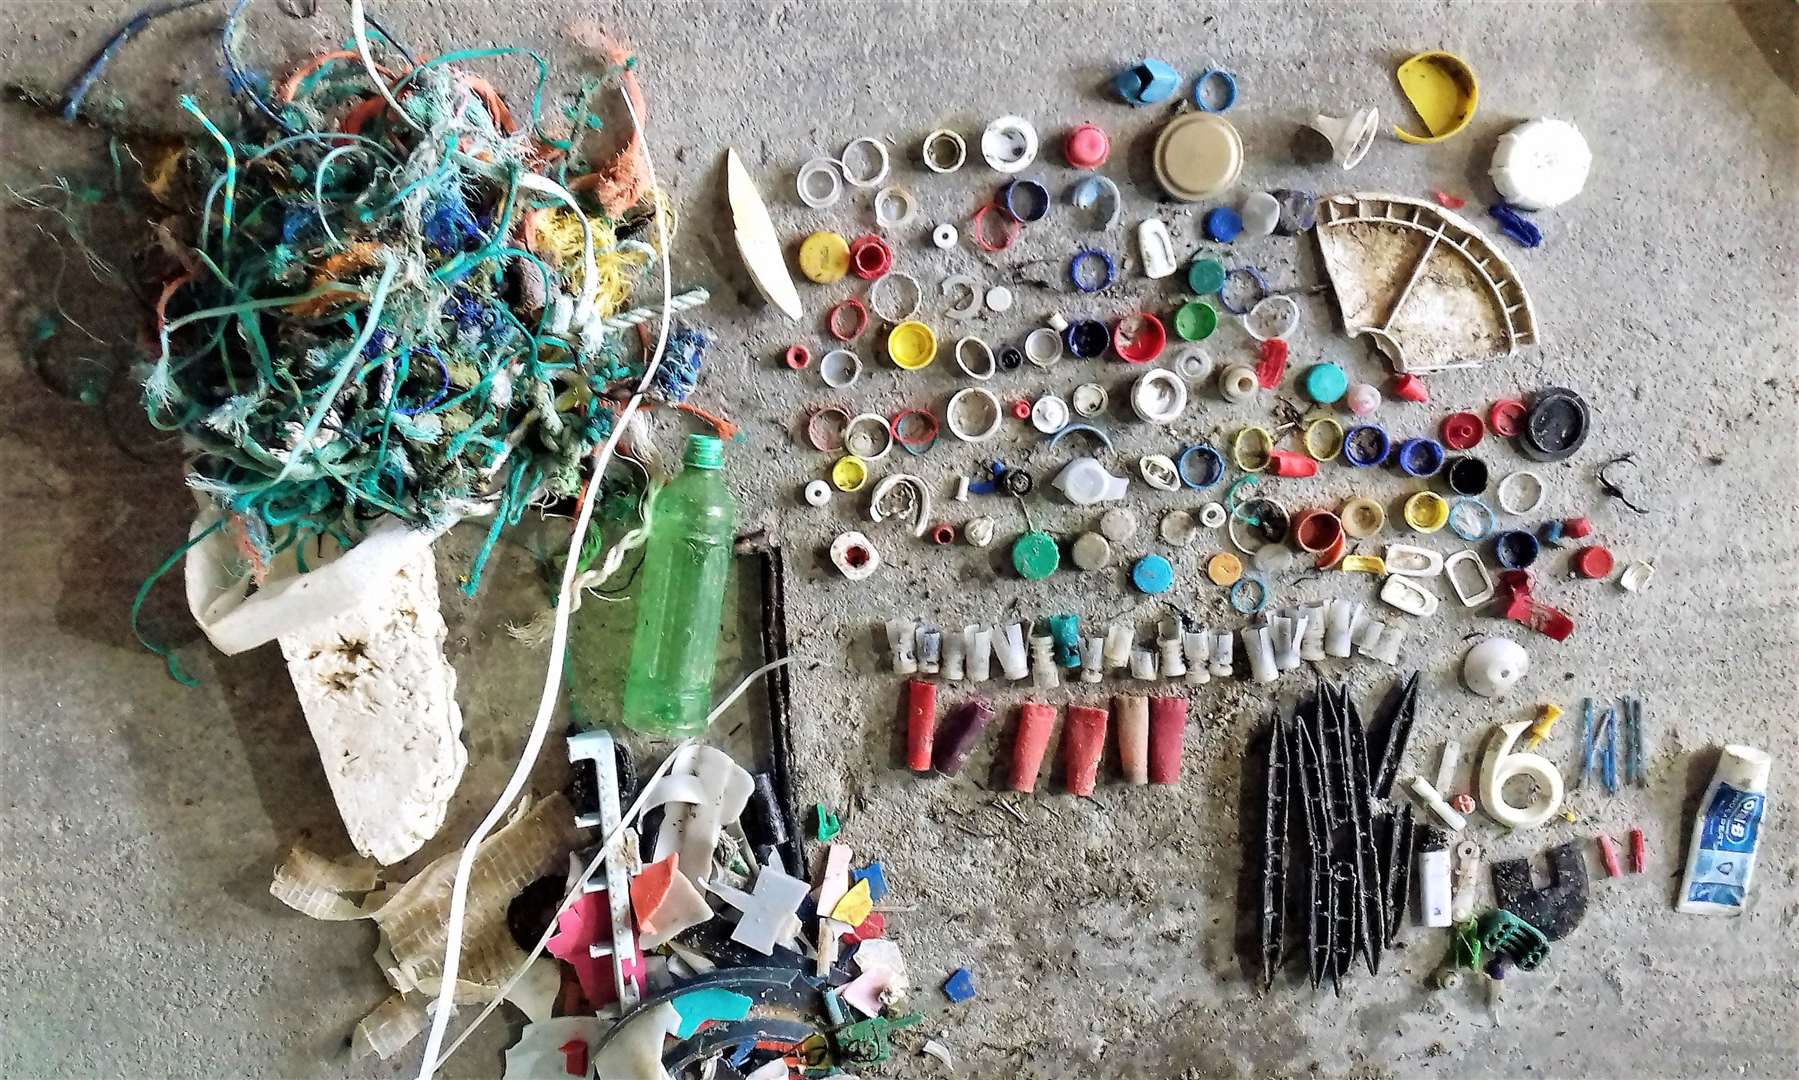 An array of colourful plastic taken from Dunnet beach by the group in its early days. There is much less plastic debris on the beach now.